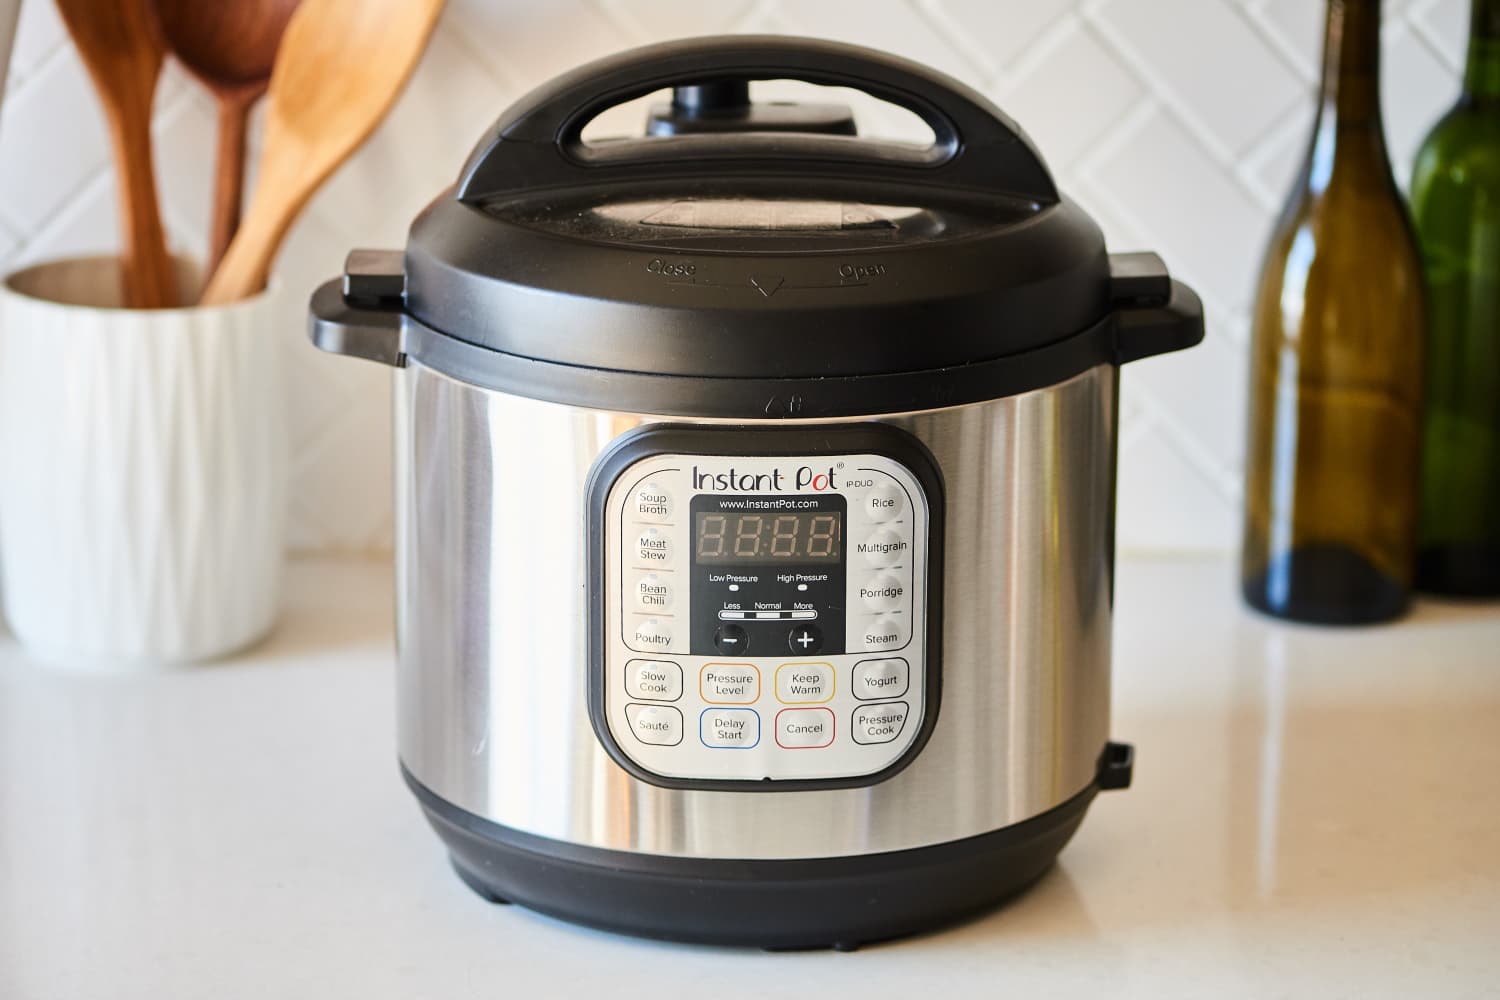 Burned off some plastic from lid - still usable? : r/instantpot